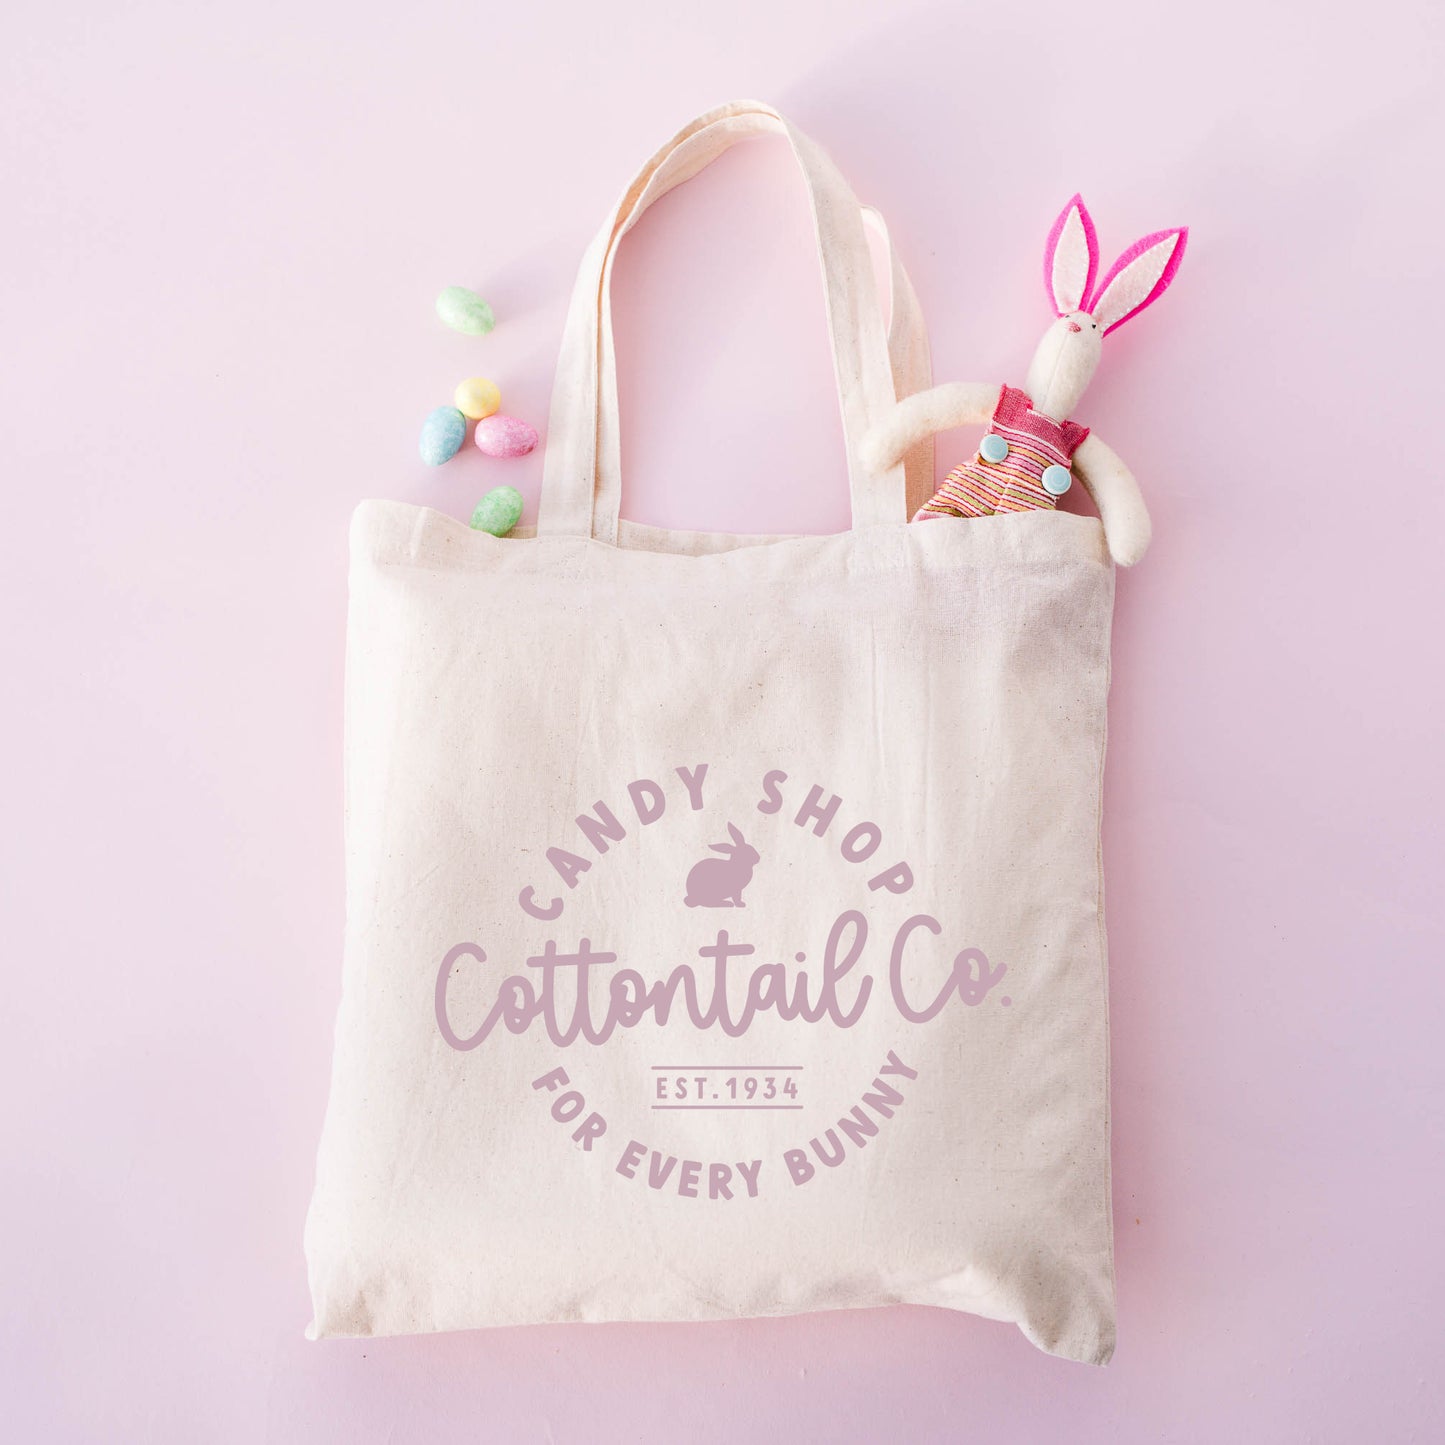 Cottontail Candy Shop | Tote Bag